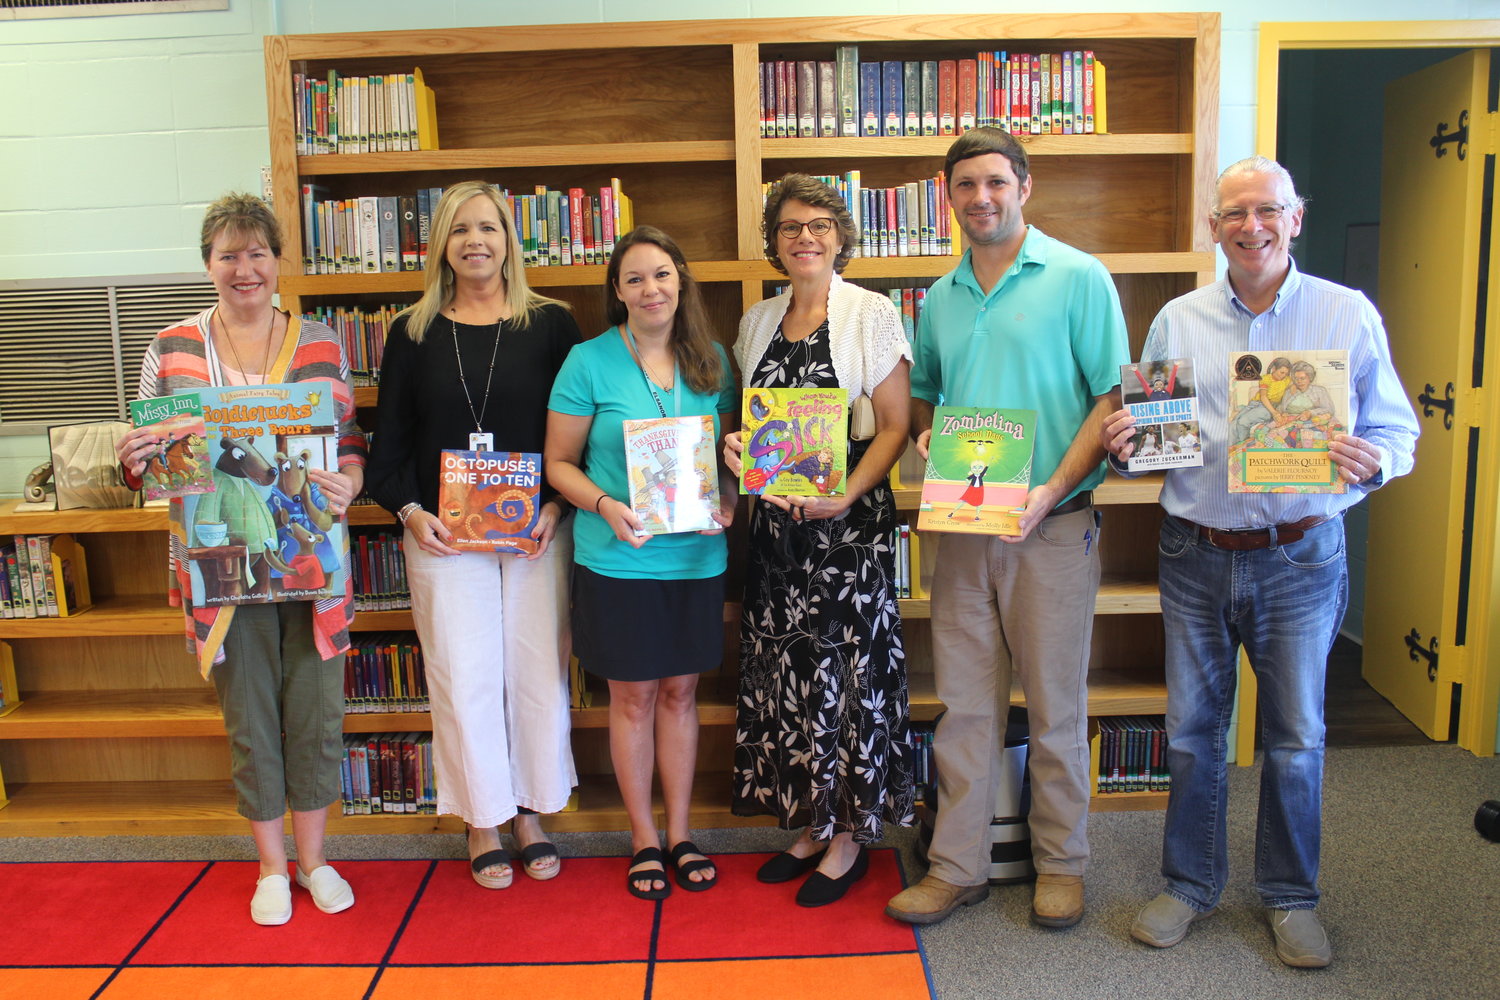 The Robertsdale Rotary Club and Dickerson Literacy Initiatives came together to make a donation of 65 books recently to Elsanor School library media specialist Susan Loy and Principal Charlotte Gray. The donation represents about half of the 125 books donated so far to the school which is looking to replace a total of 4,000 books. Pictured, from left, are Kimberly Knoth with Dickerson Literacy Initiatives, Gray, Loy, Robertsdale Rotary Club President Rebecca Mills, Rotary Club Vice President/President Elect Ryan Frolik and Carl Dickerson.